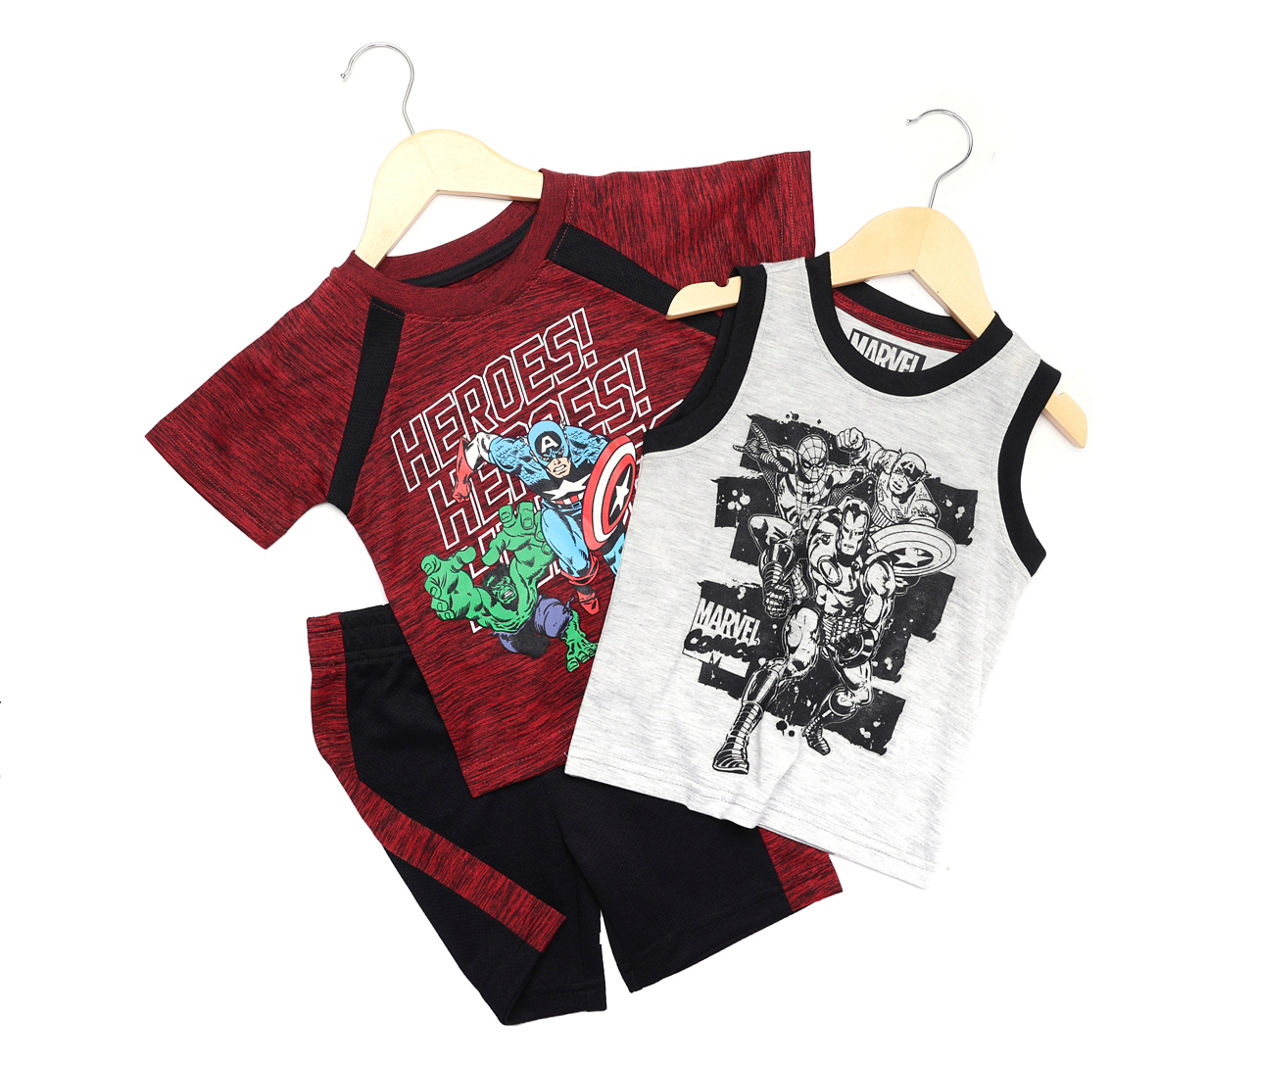 Kids' Size 8 Red & Black Avengers 3-Piece Performance Outfit